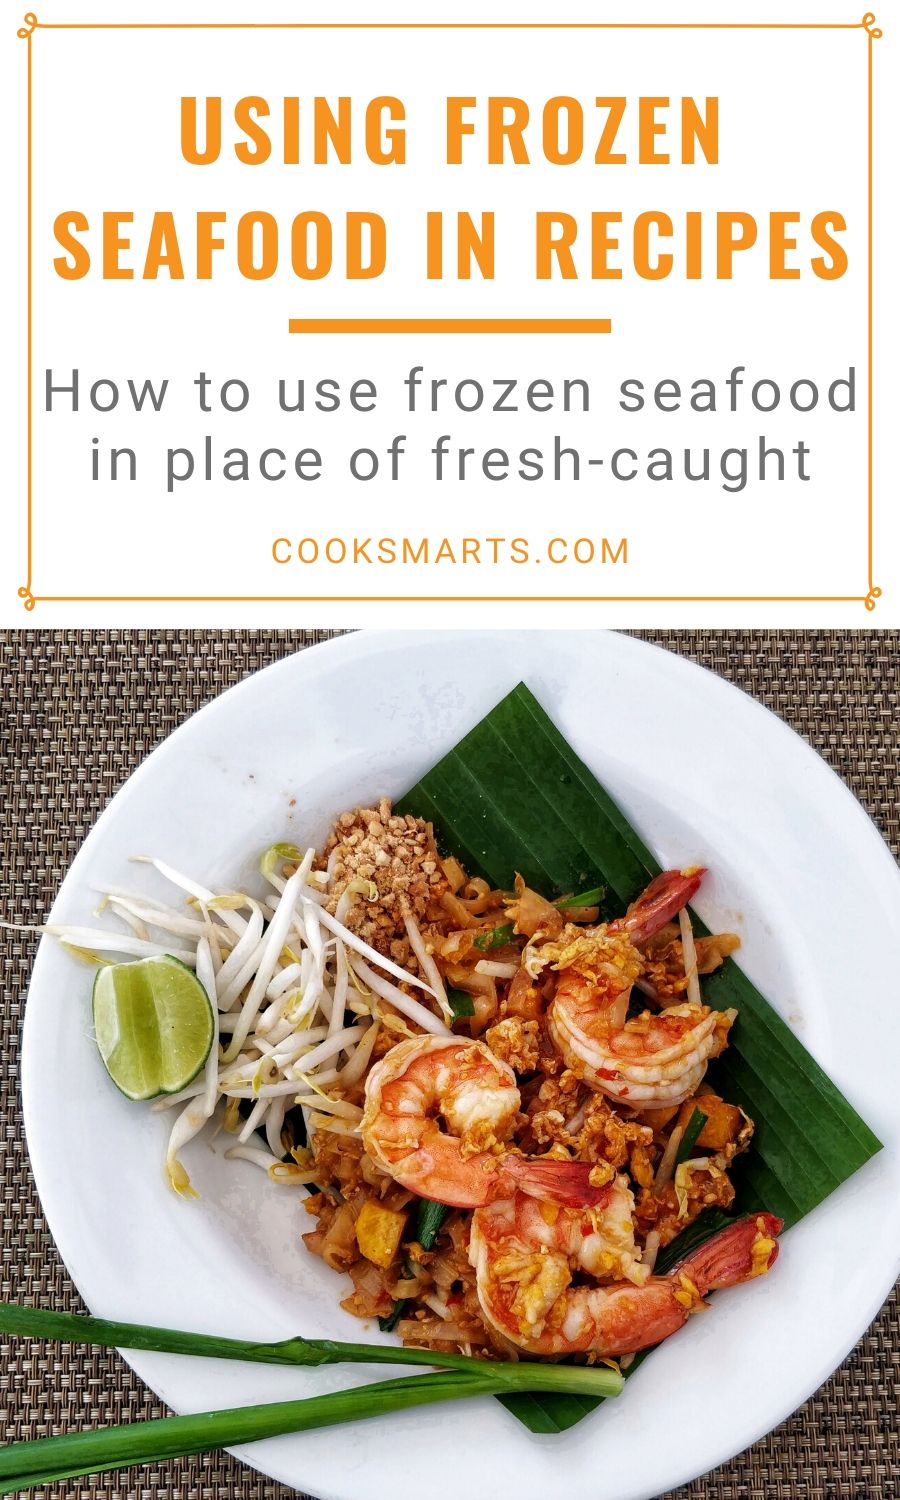 How to Use Frozen Seafood | Cook Smarts